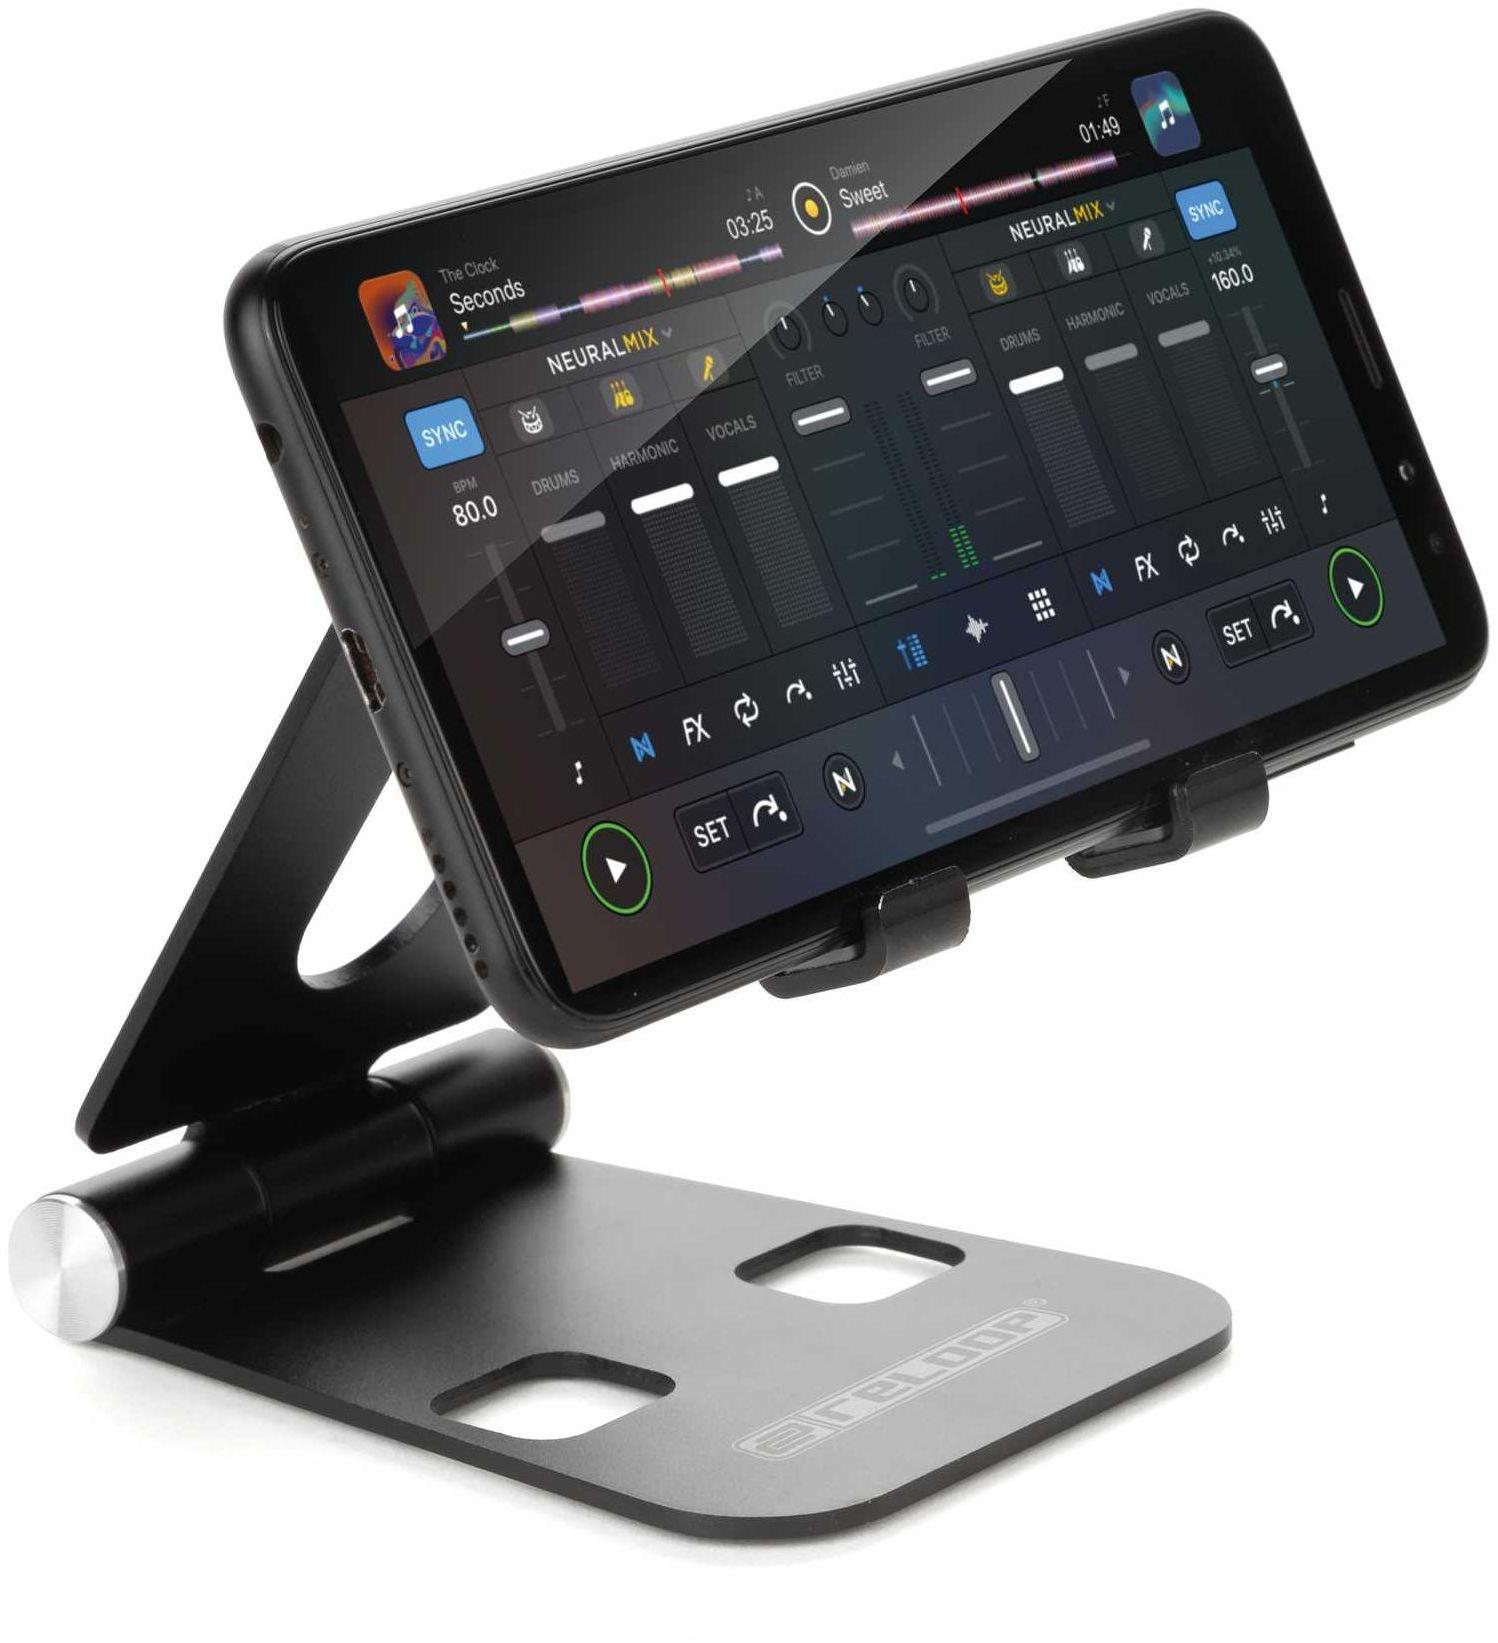 Stand & support dj Reloop Smart Display Stand